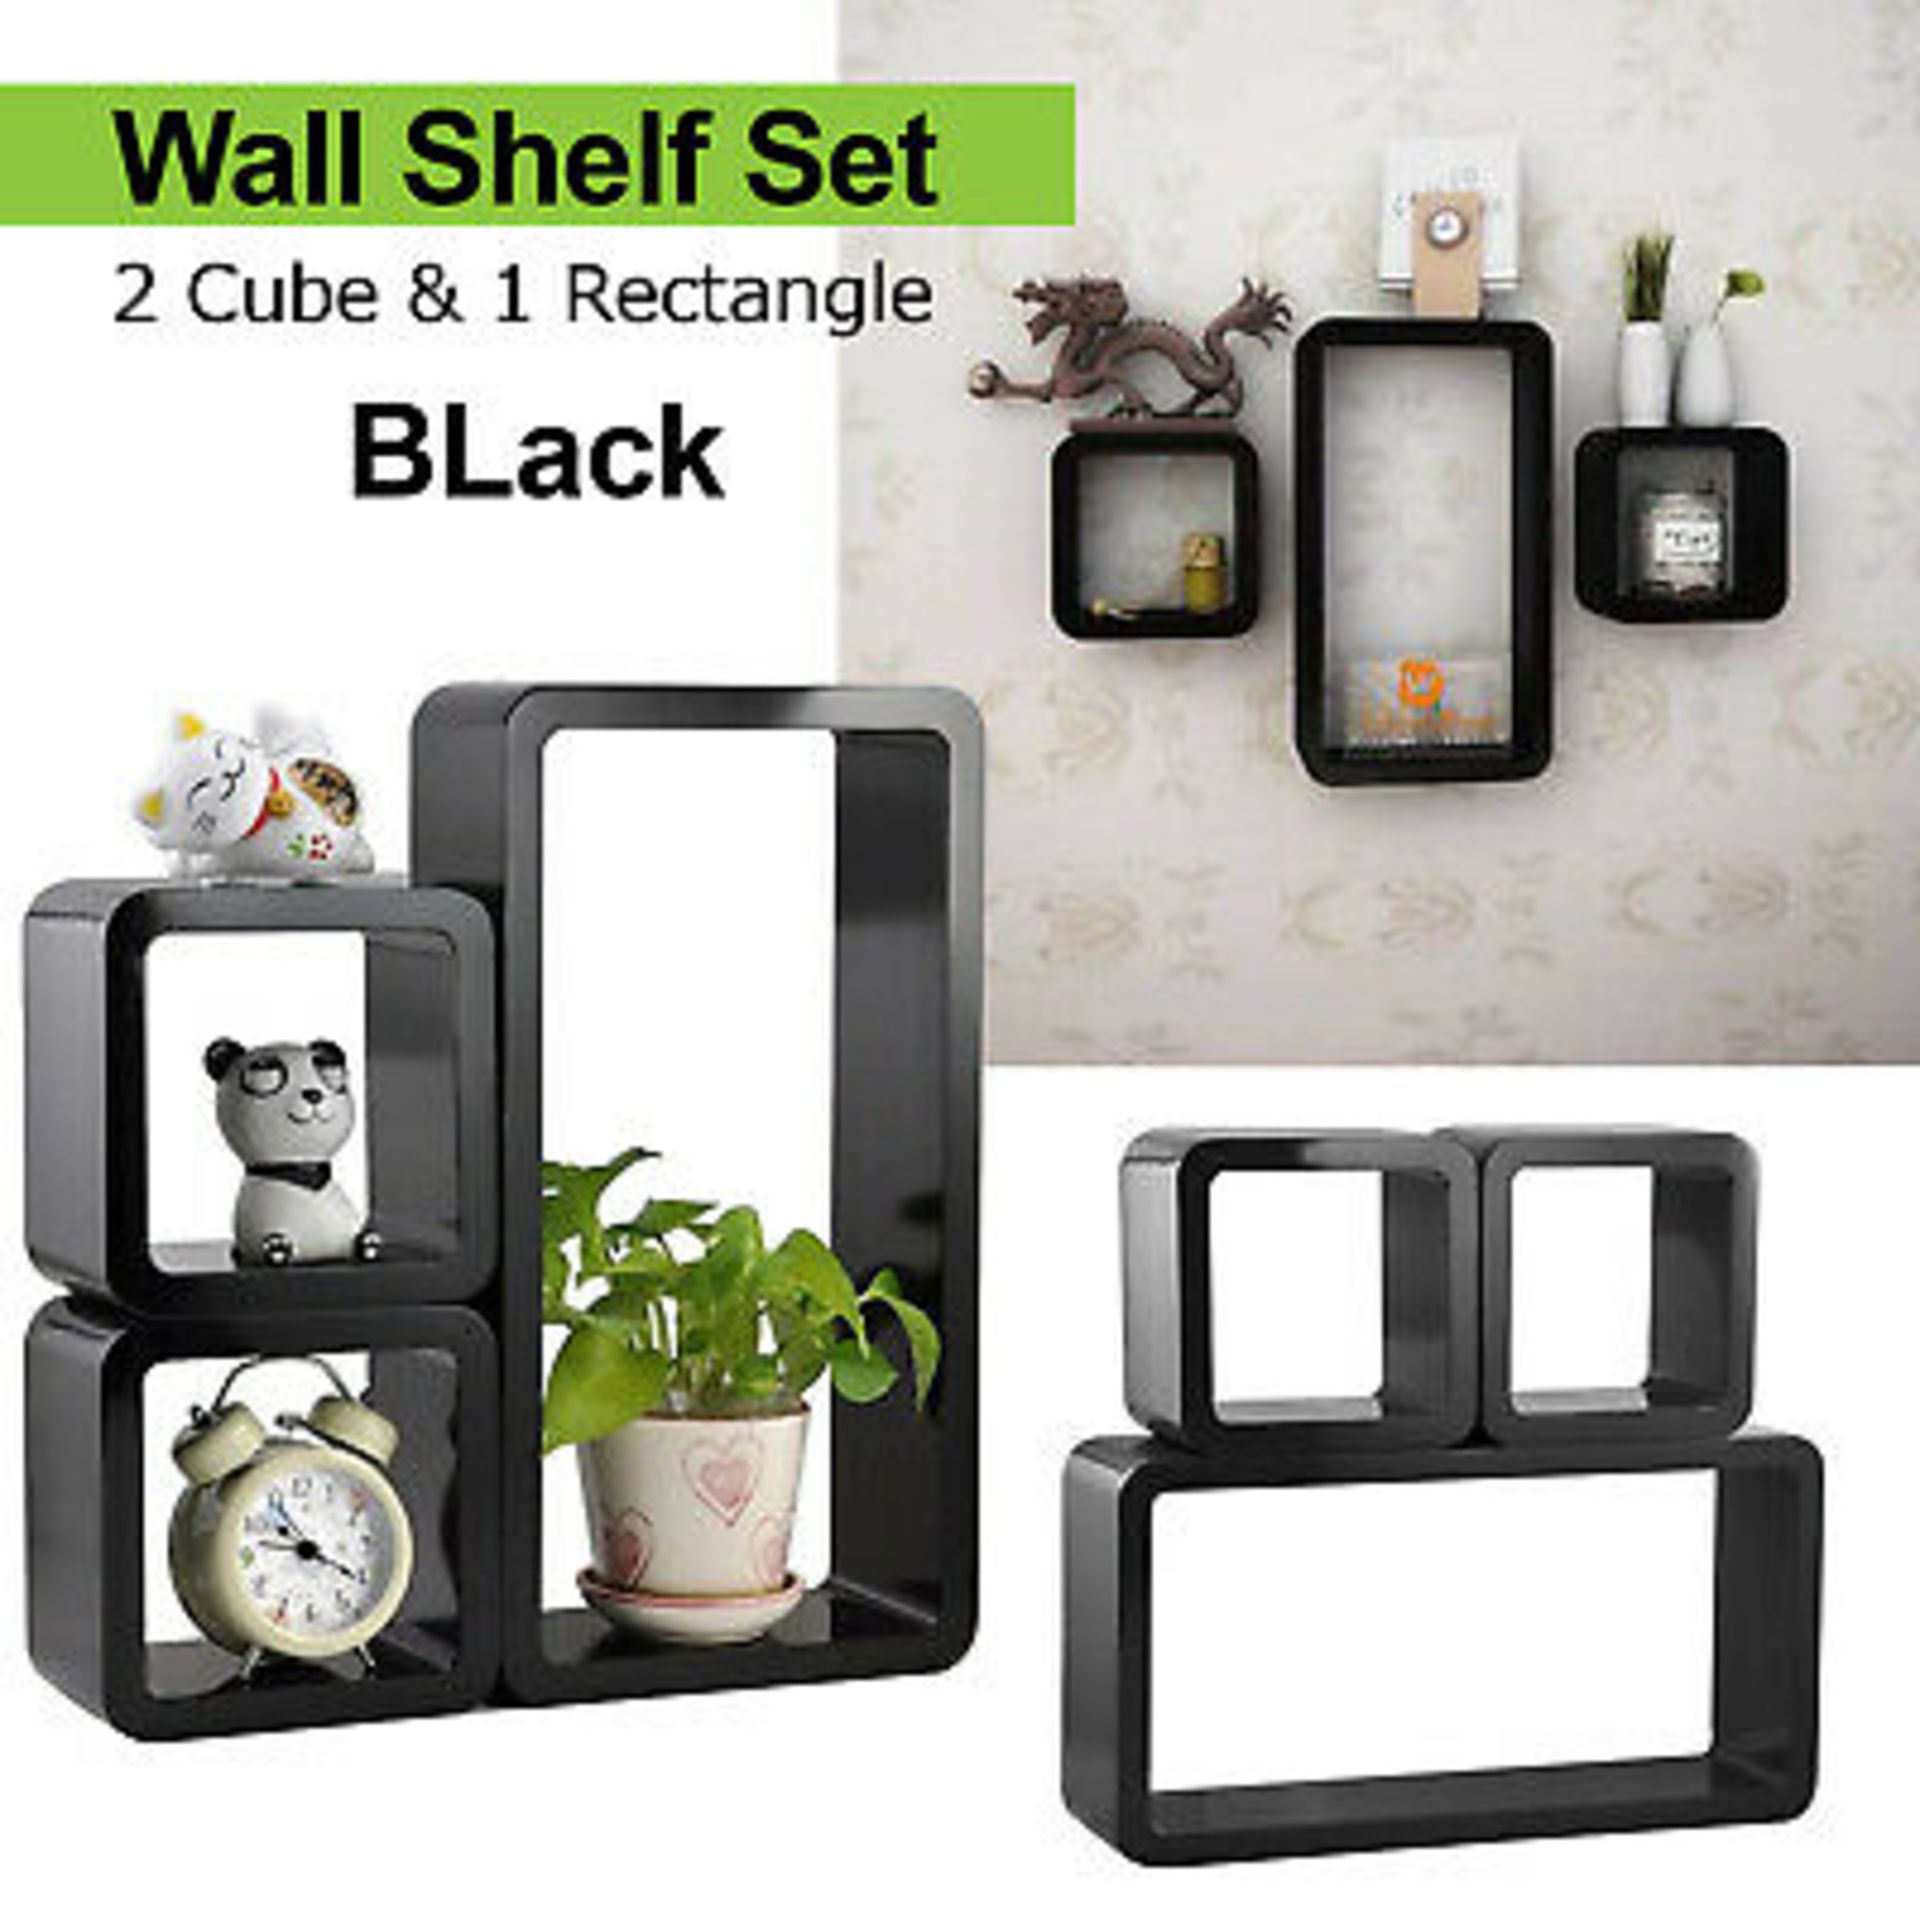 PALLET TO CONTAIN 160 X NEW BOXED SETS OF 3 CHUNKY CUBES READY ASSEMBLED WALL SHELVES-BLACK. RRP £